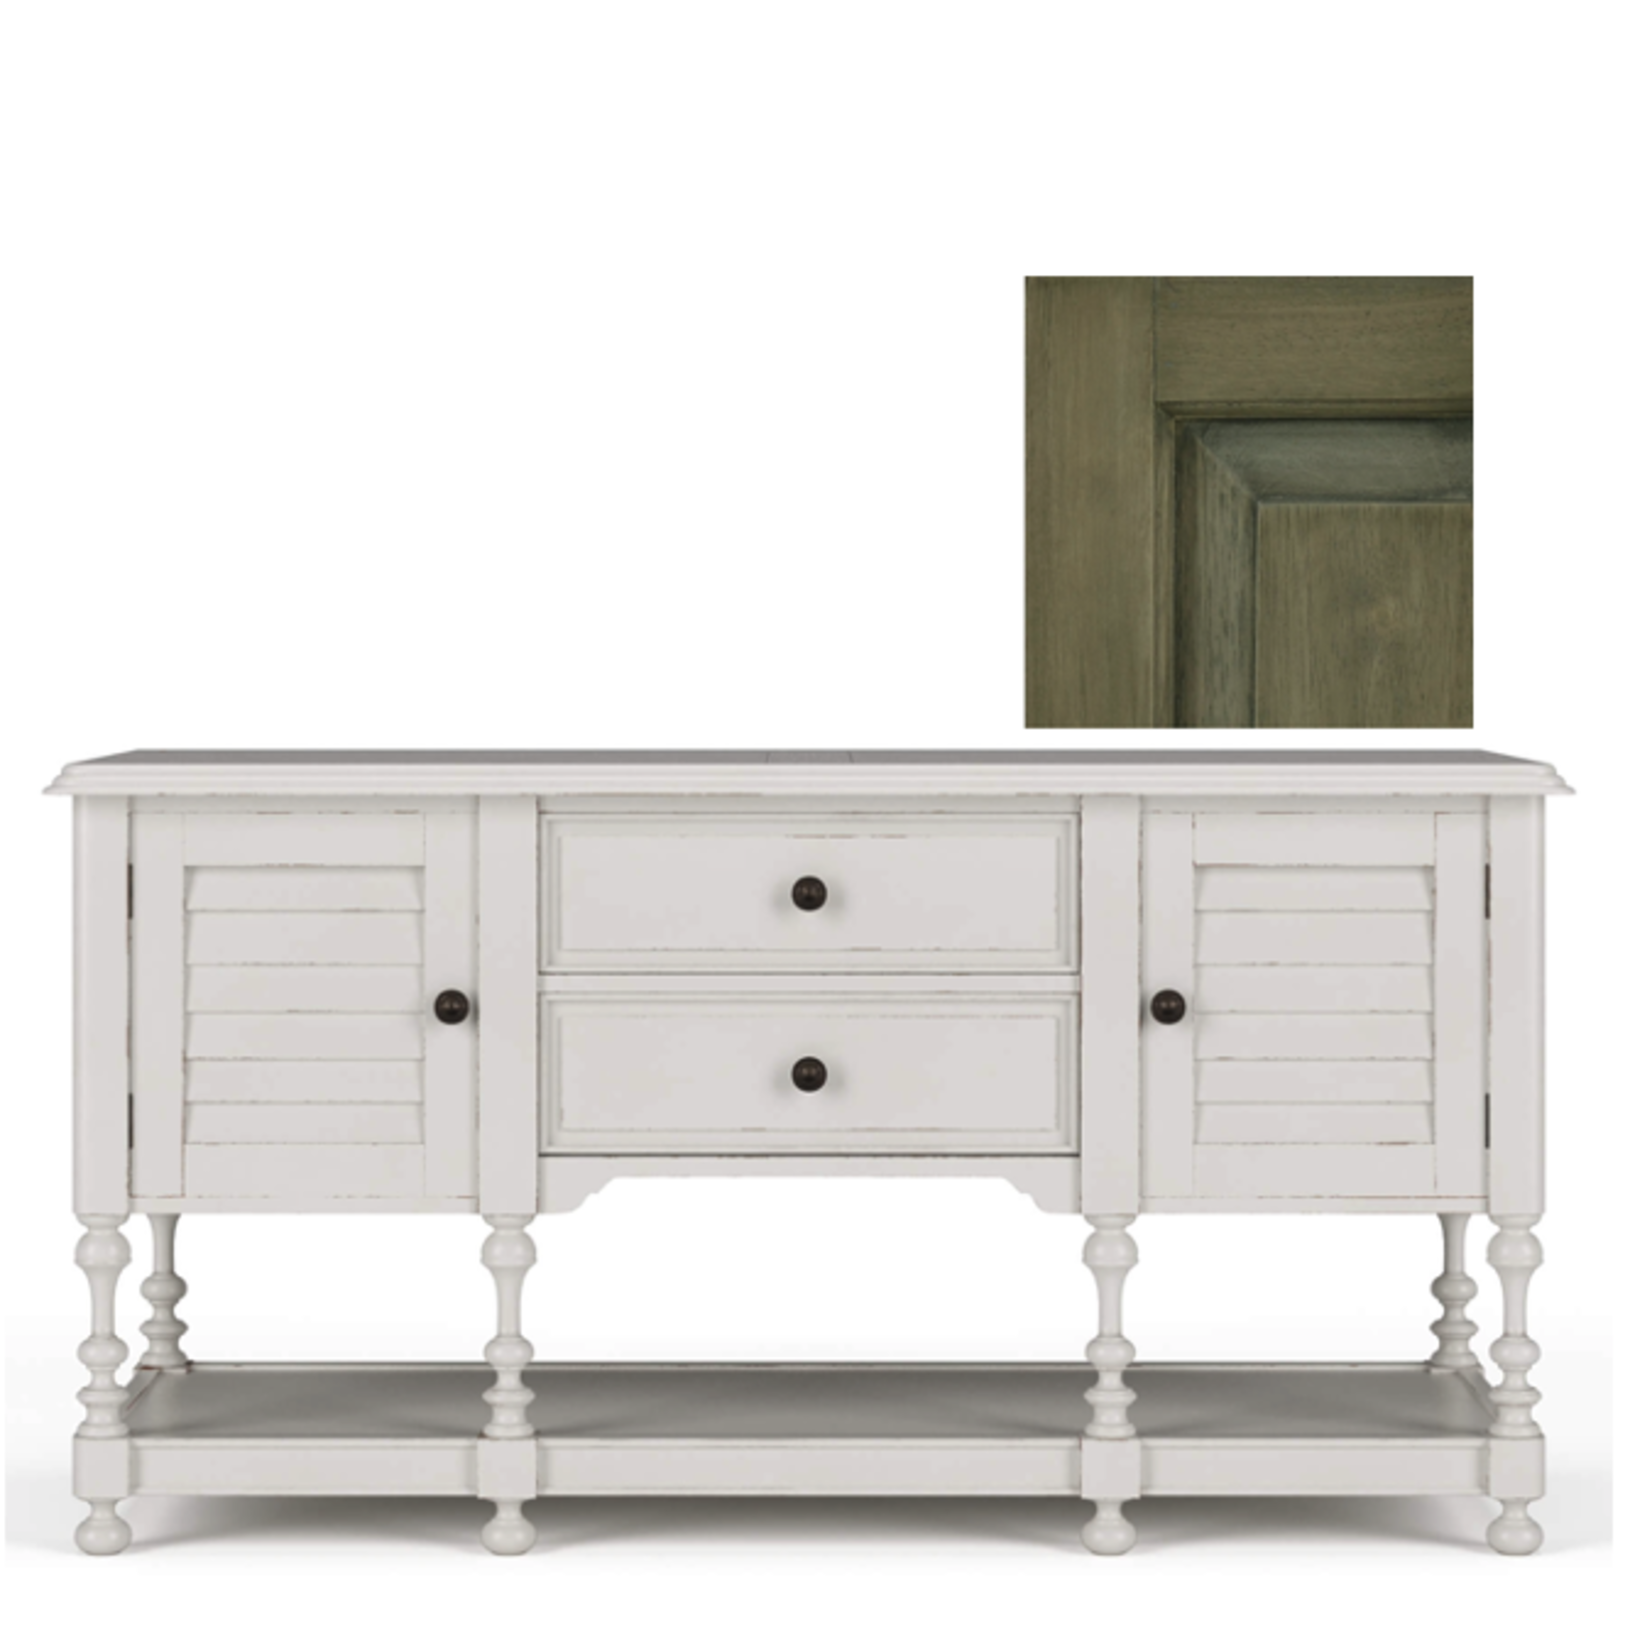 Outside The Box 70x24x36 Orleans Solid Mahogany Sideboard 2 Door 2 Drawer In Mission Gray